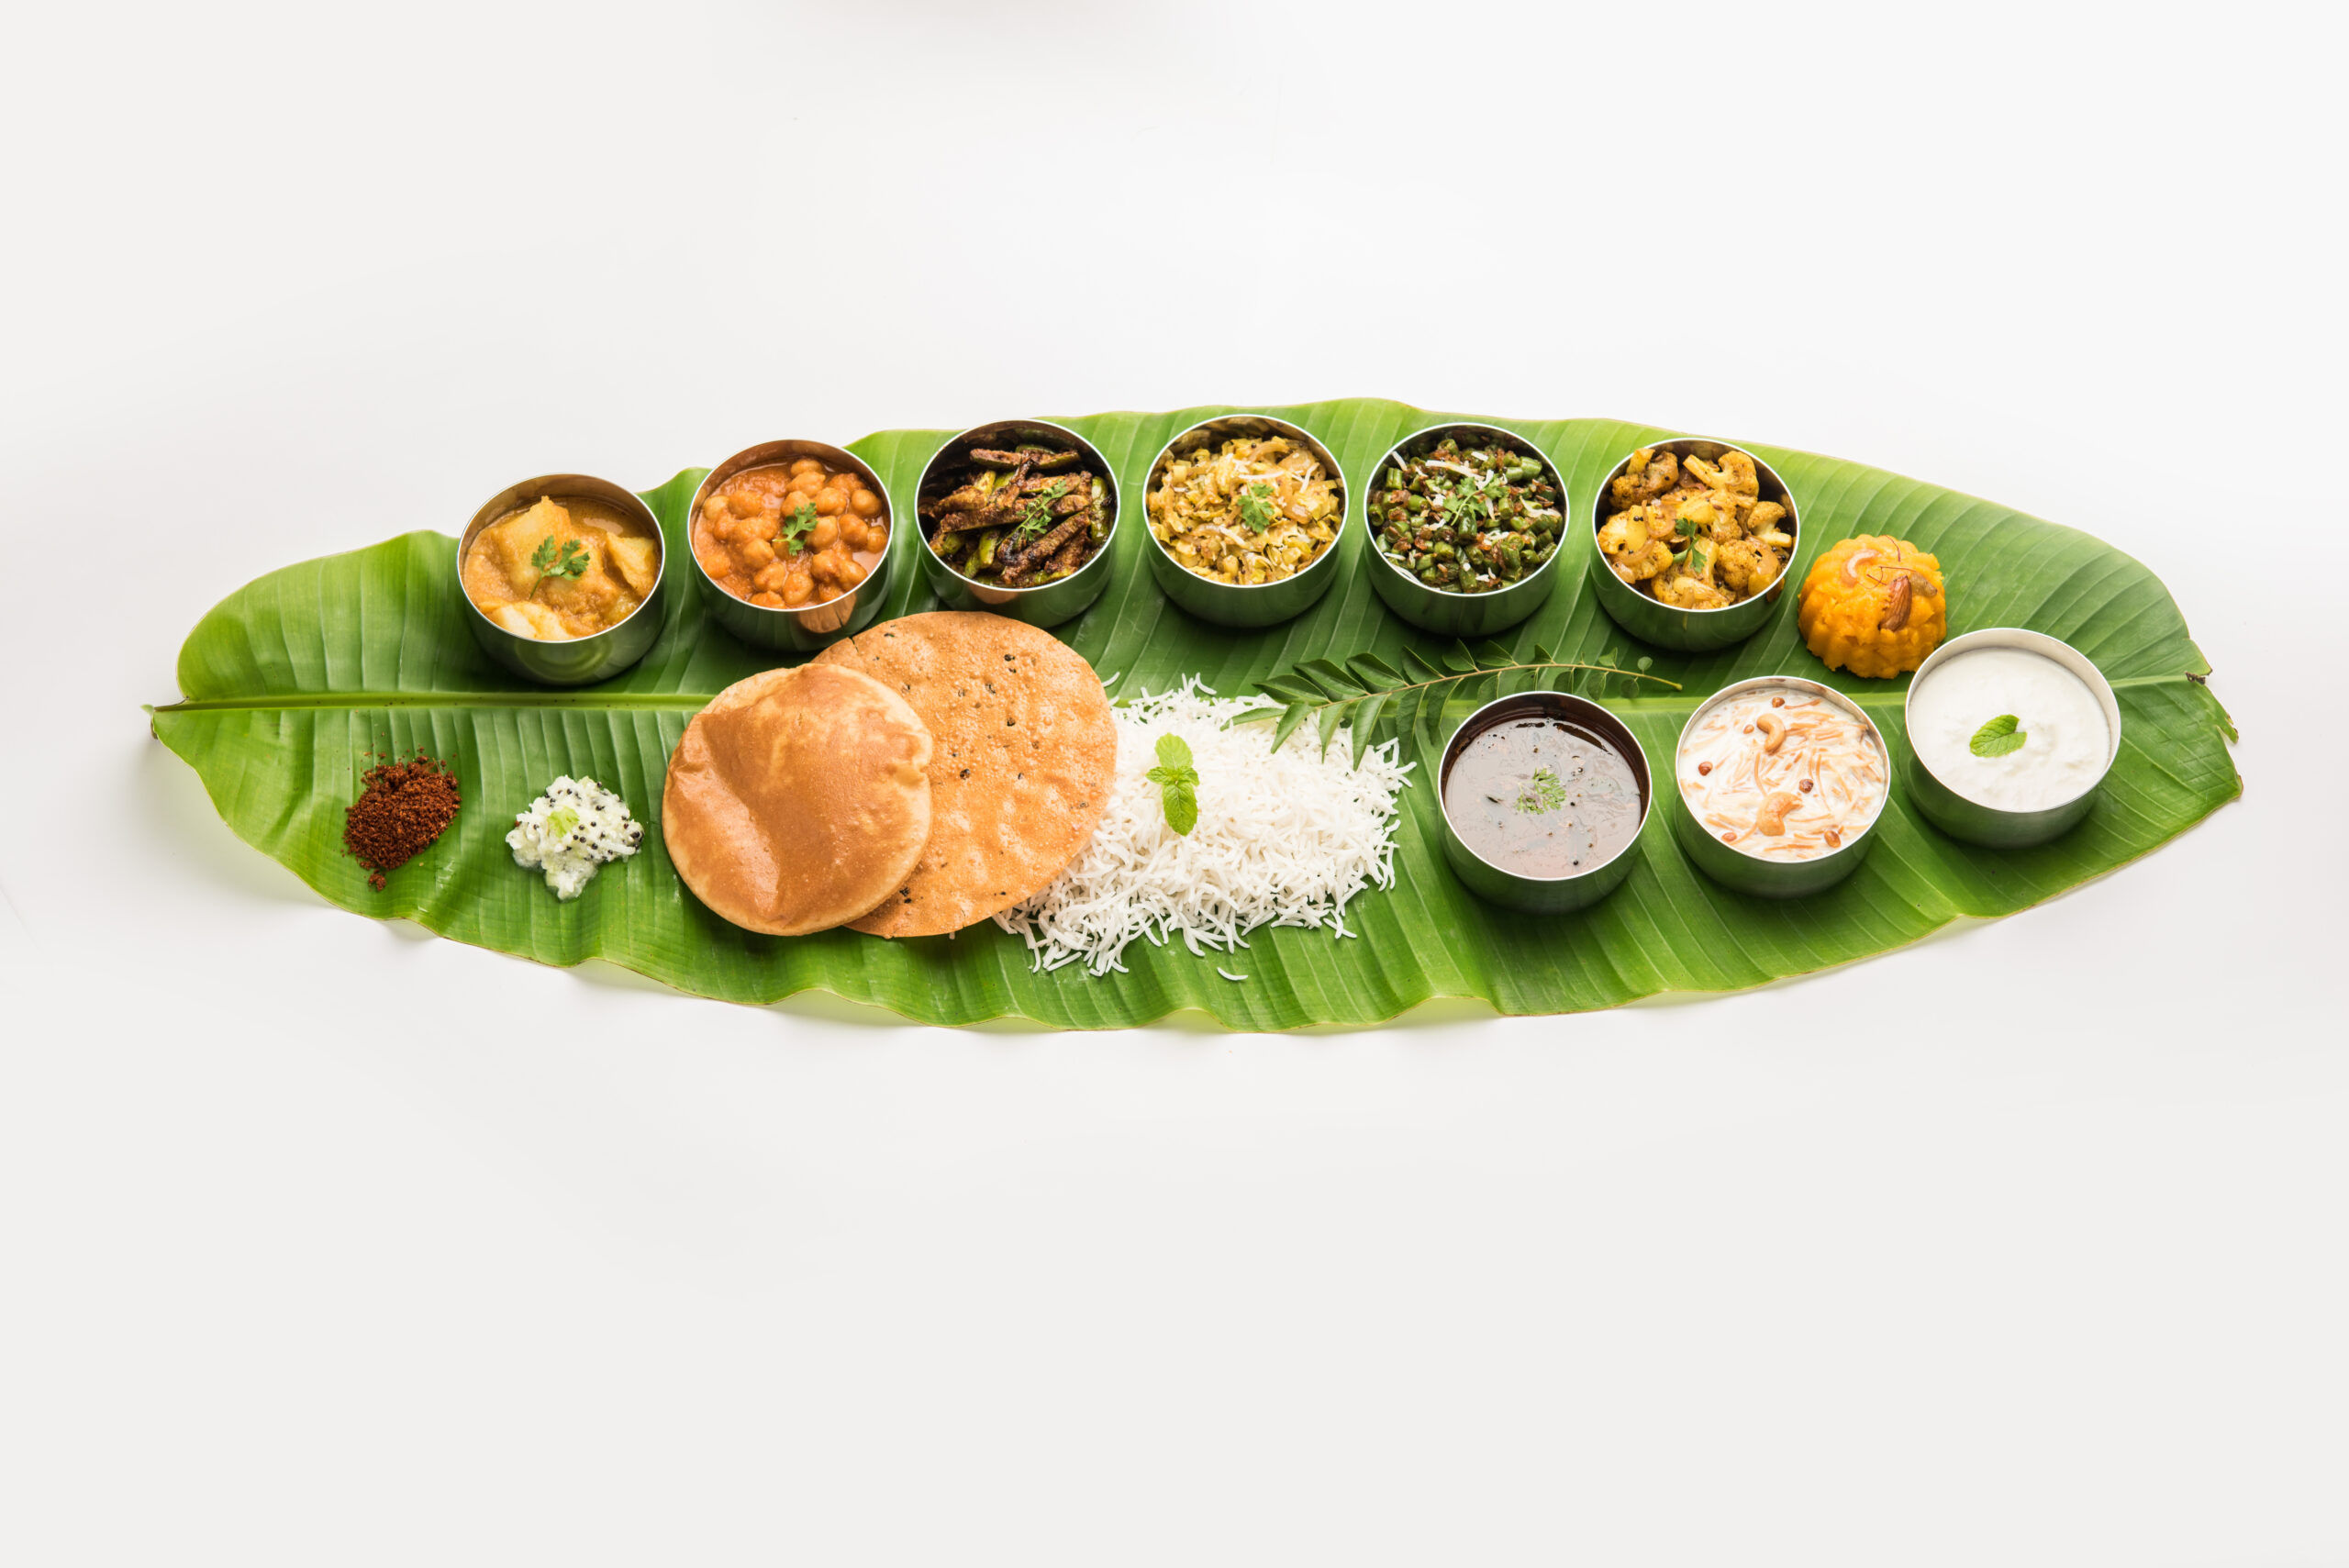 Orappu’s Veg Meals: A Vegetarian Delight on the Highway